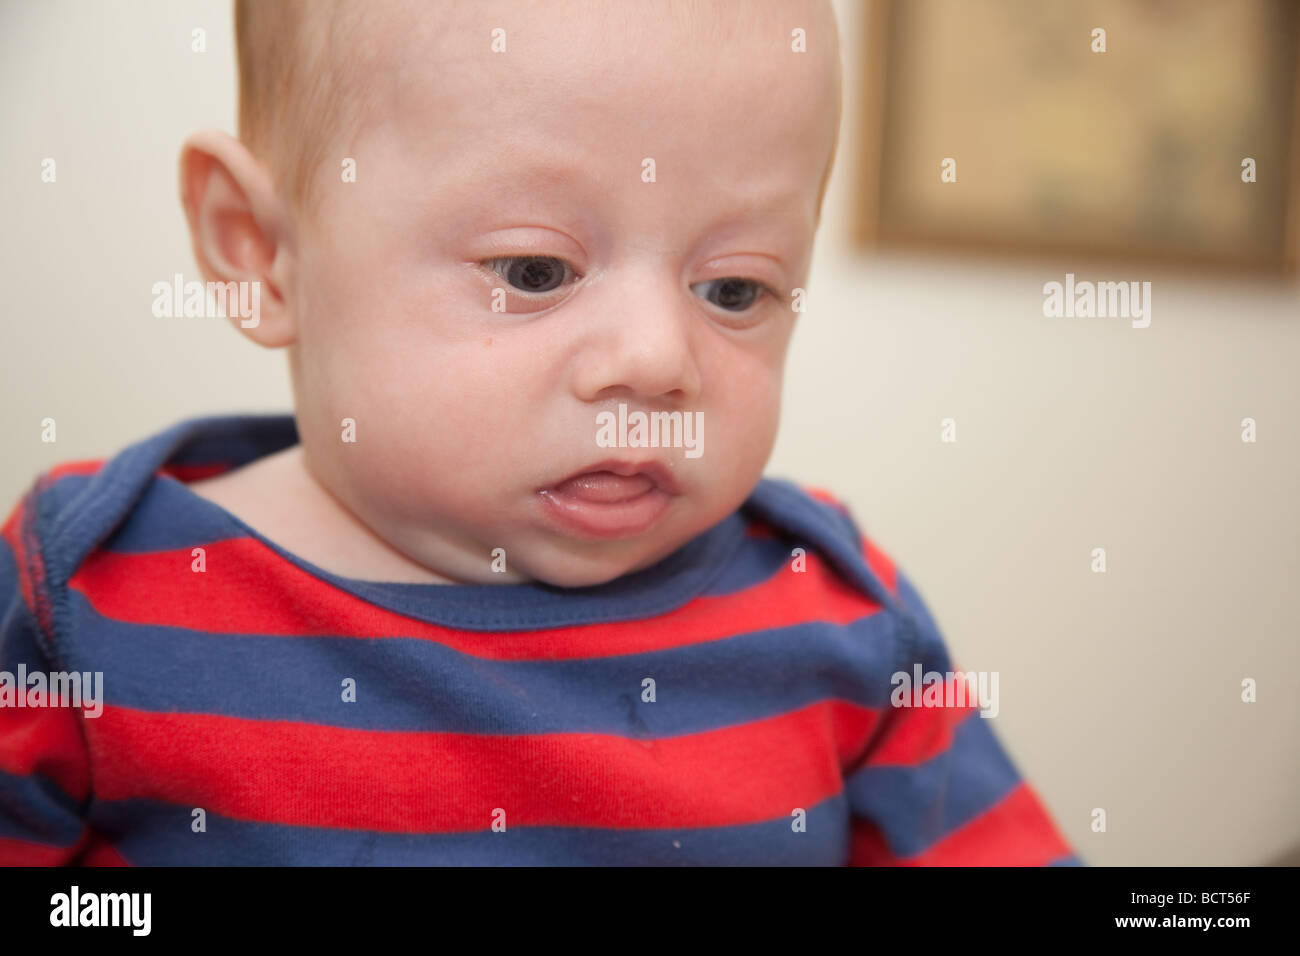 Two month old baby boy wearing a red and blue striped suit, London, England. Stock Photo